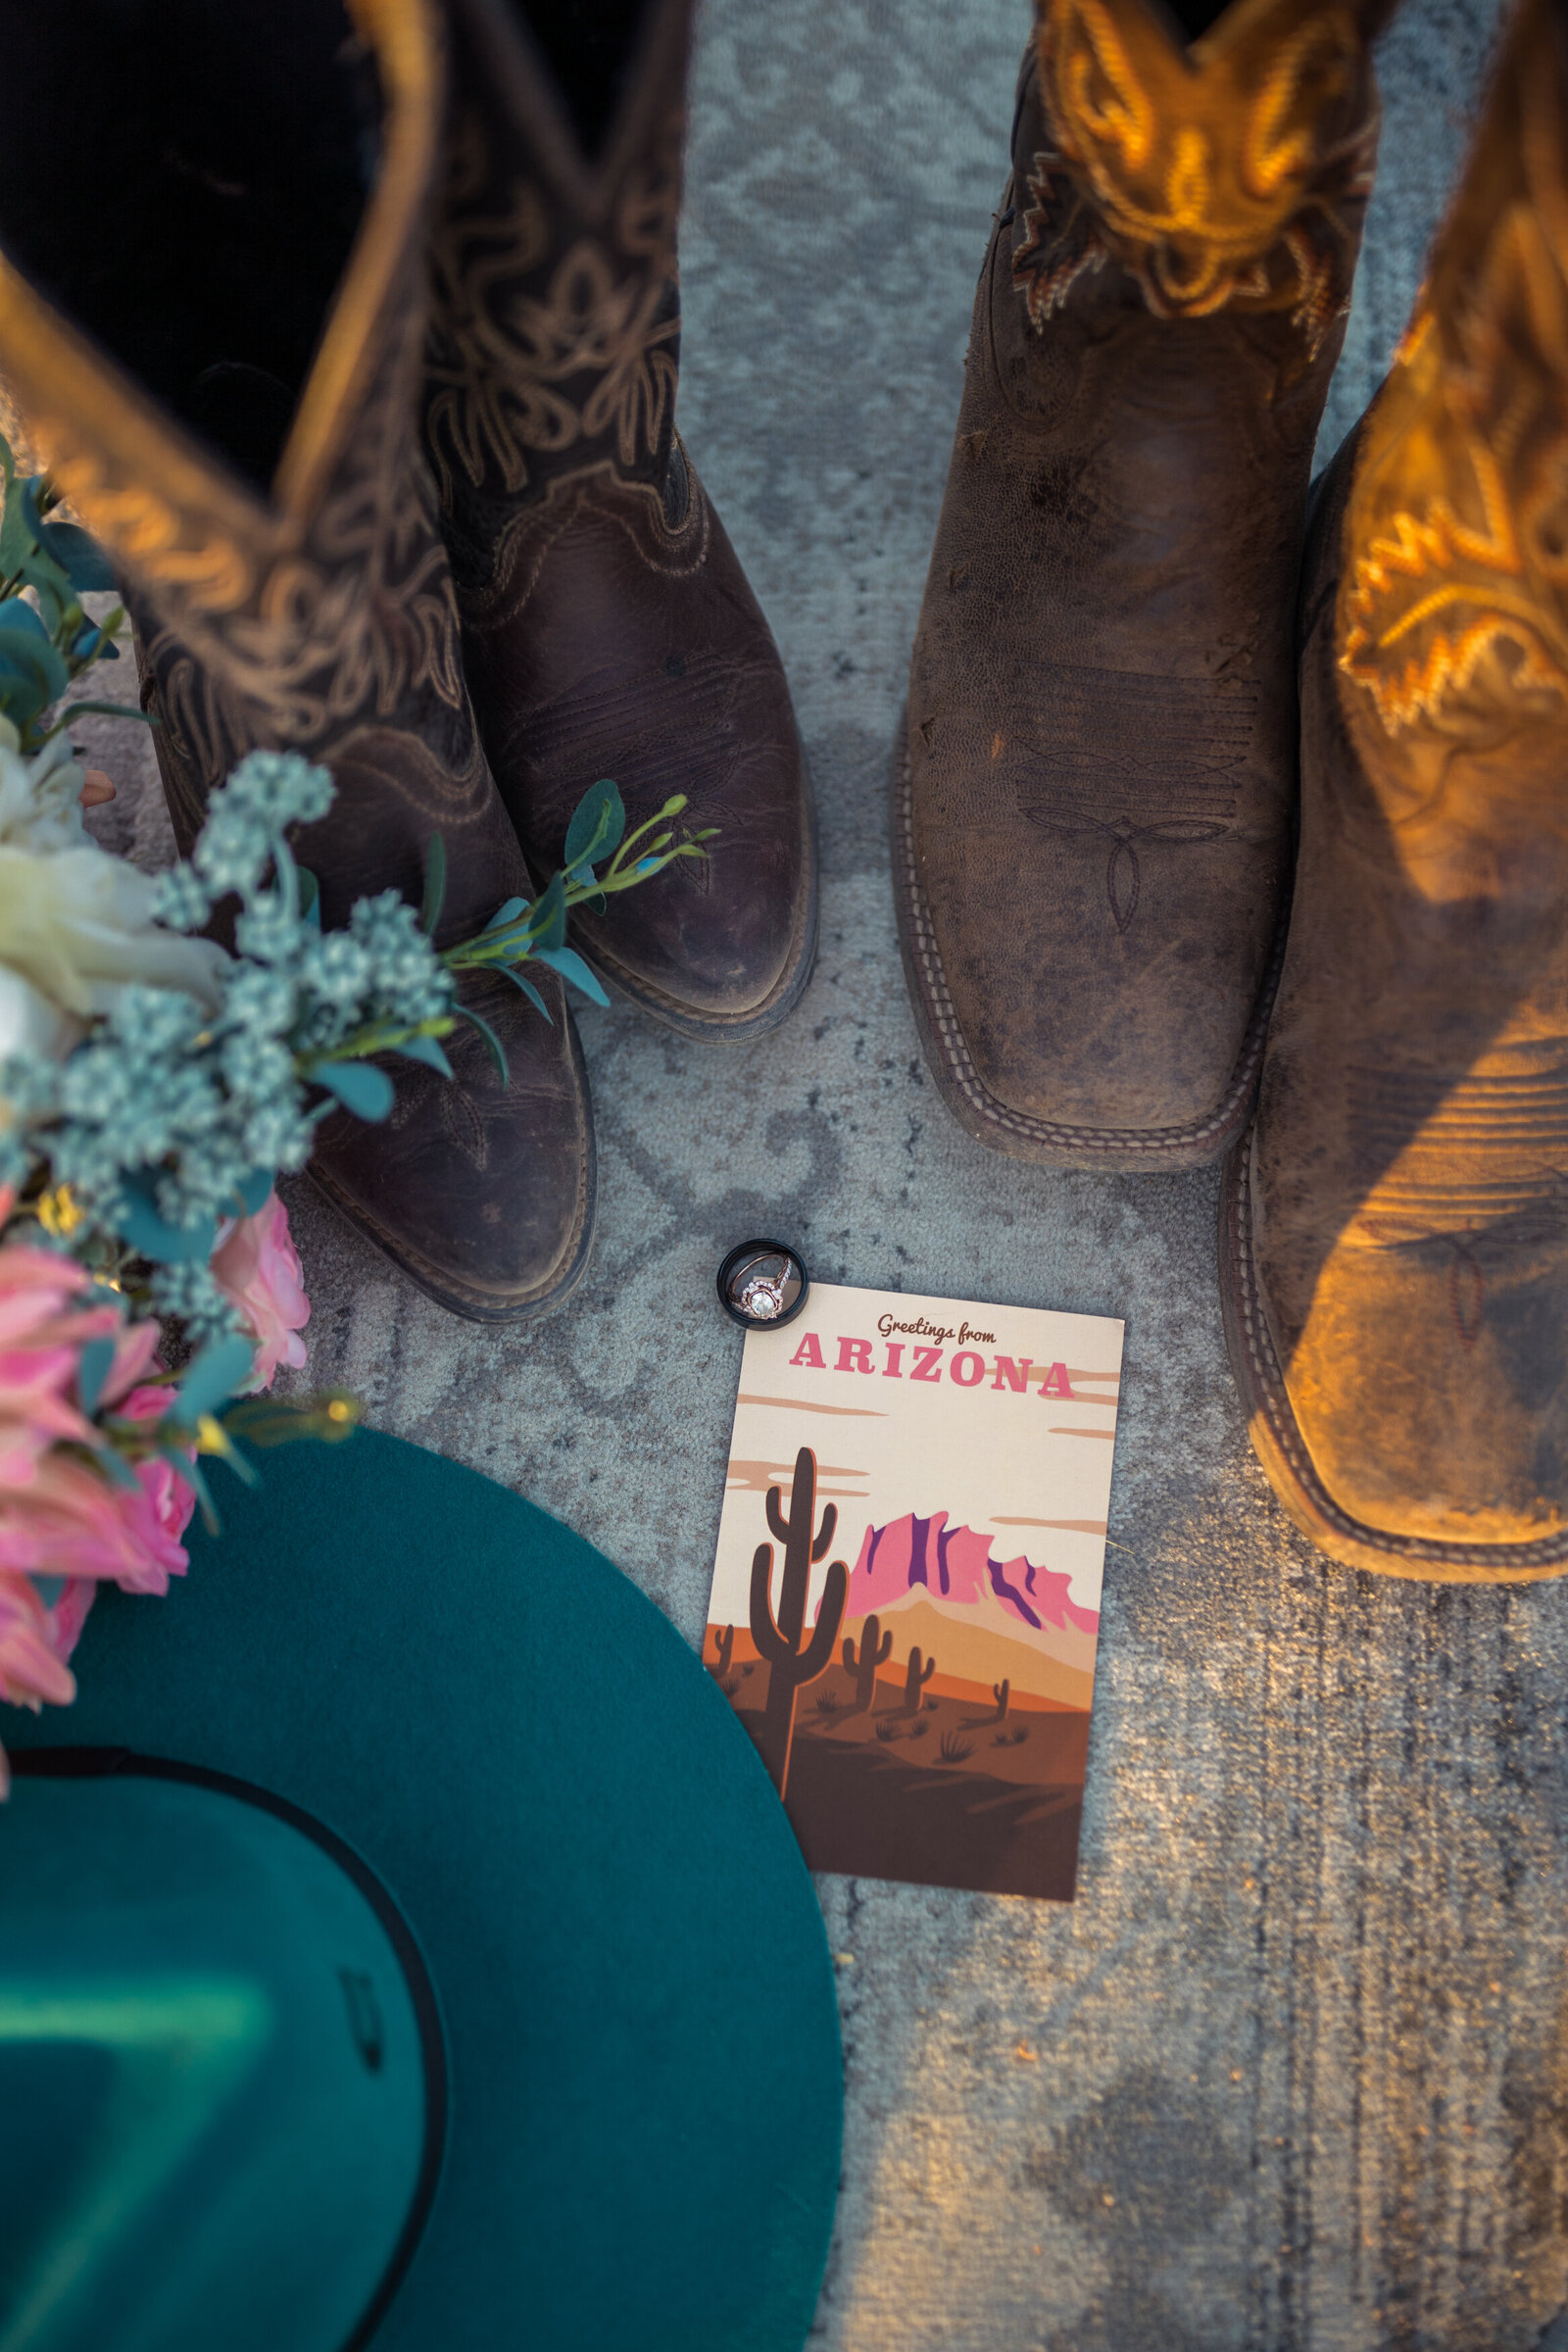 Arizona wedding invitation with cowboy boots and charlie one hat